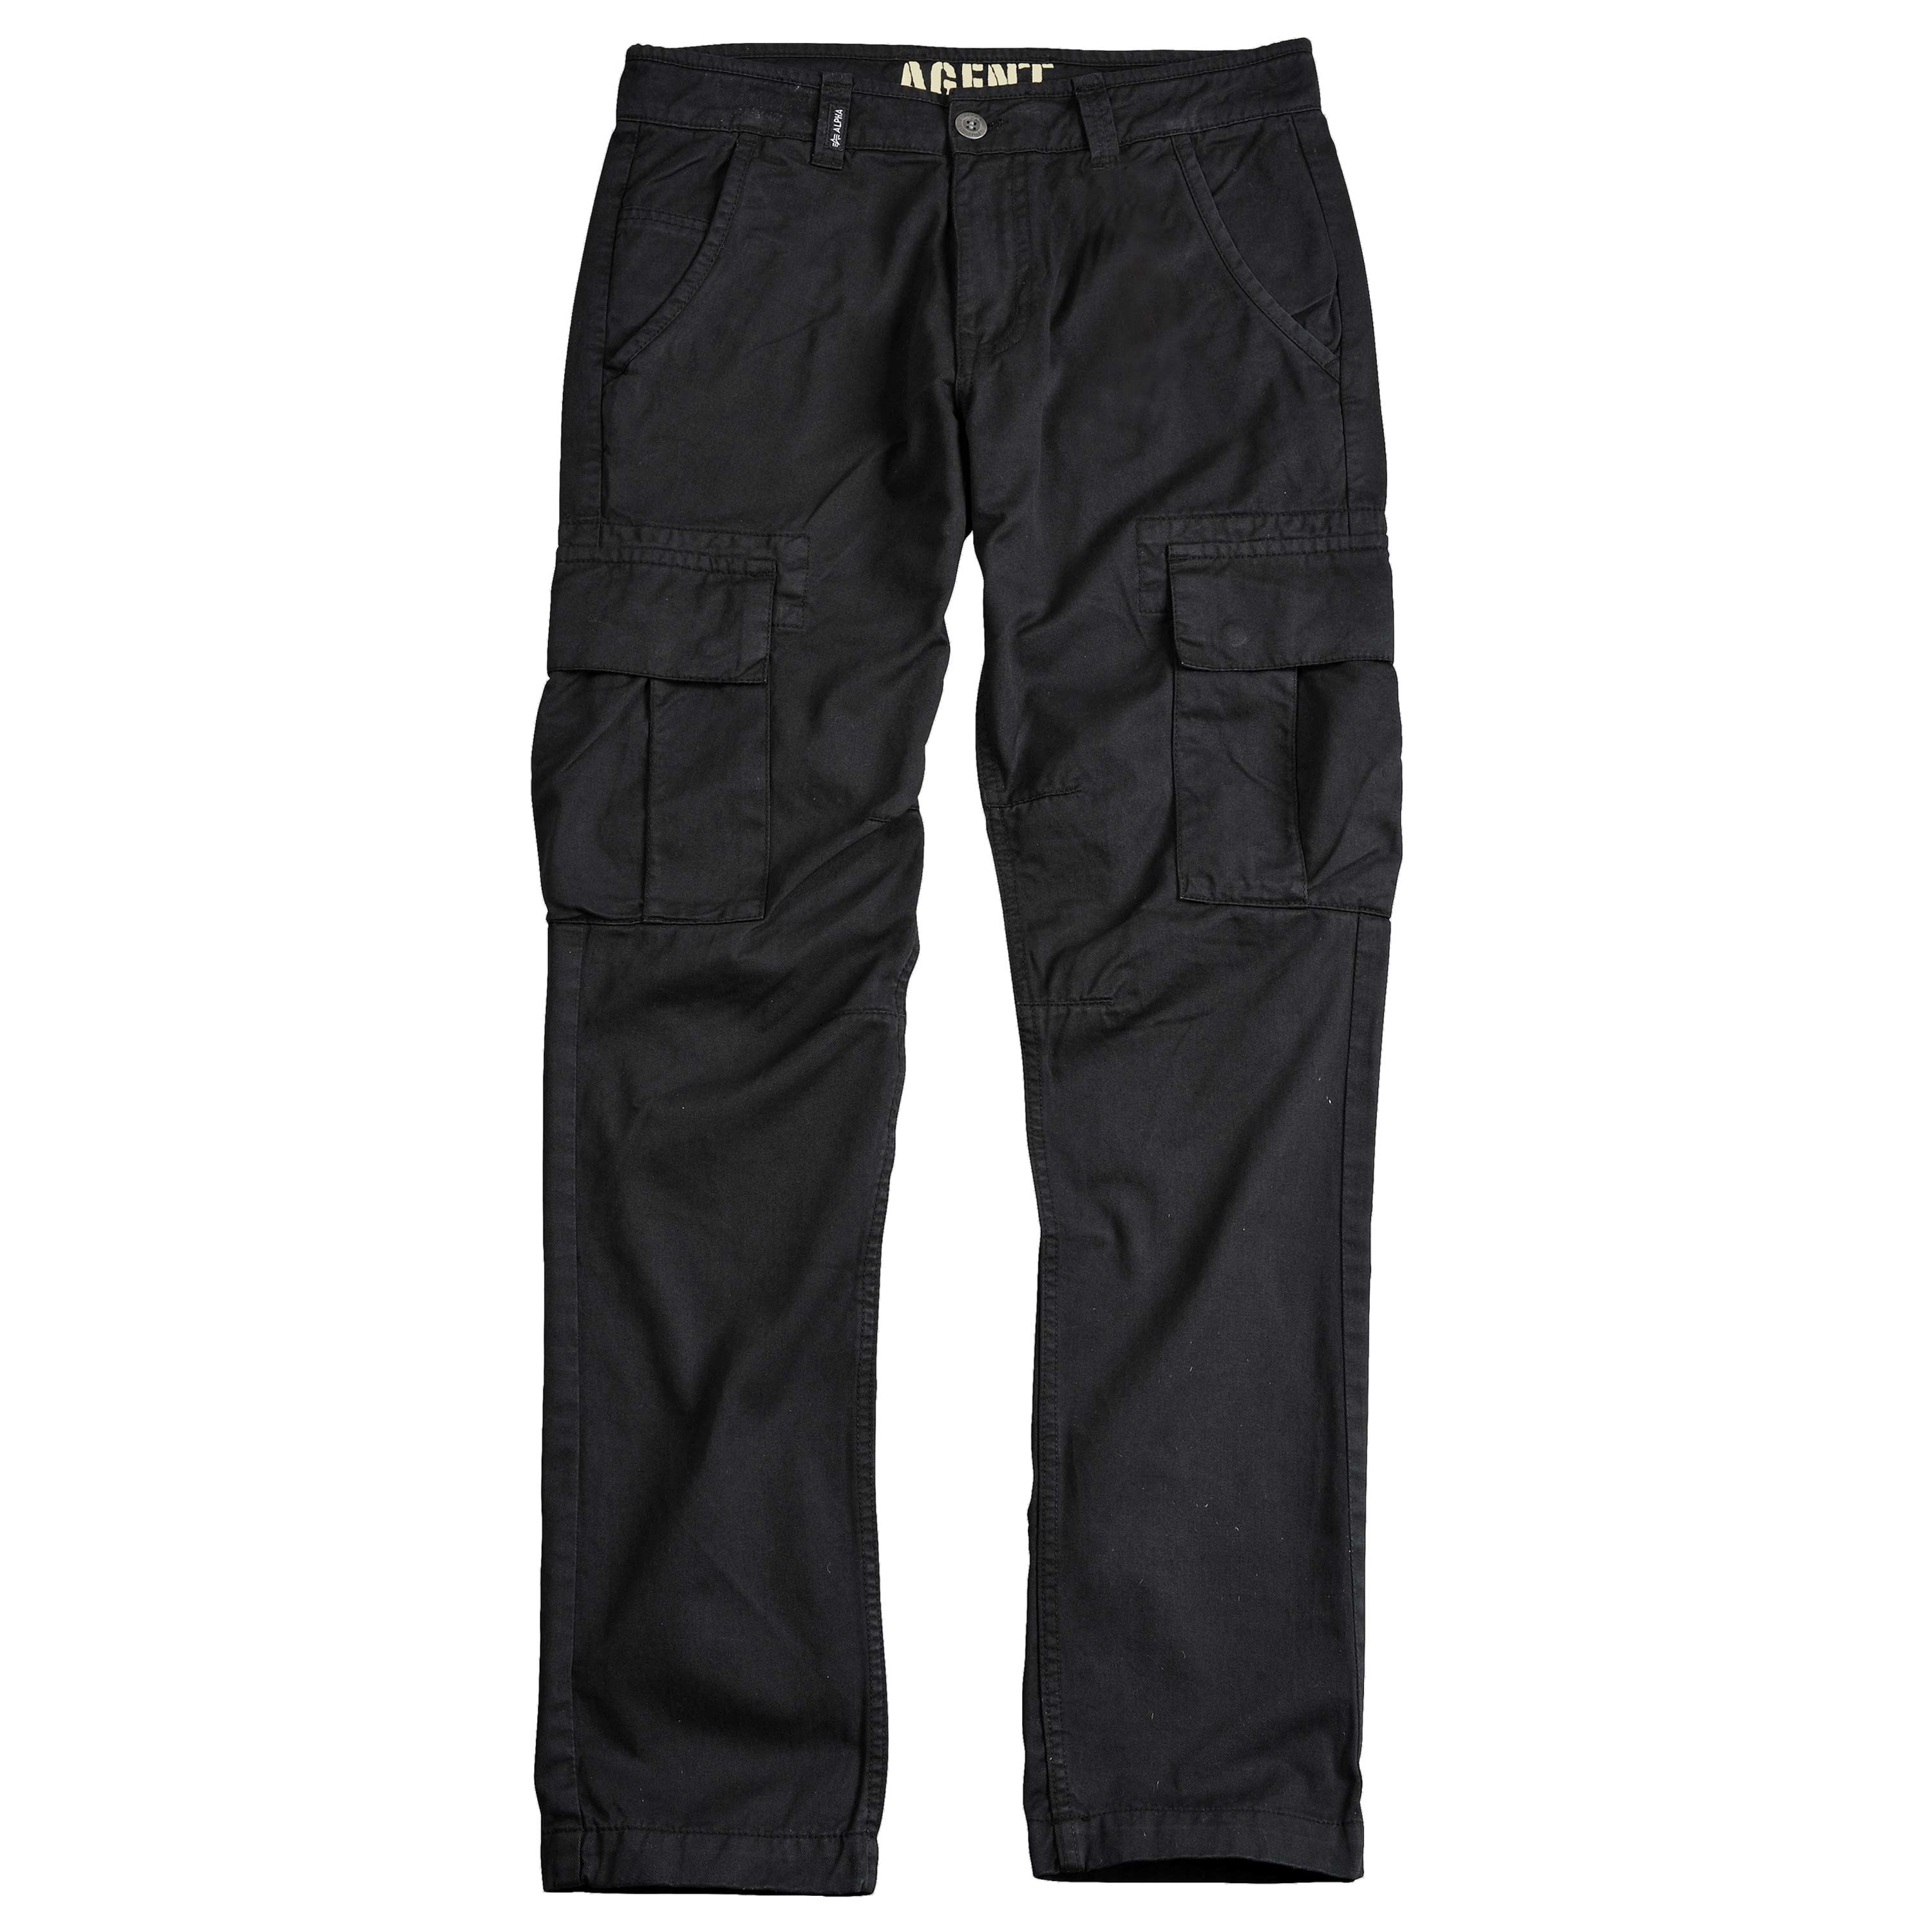 Agent by Industries Purchase the ASMC Pants black Alpha